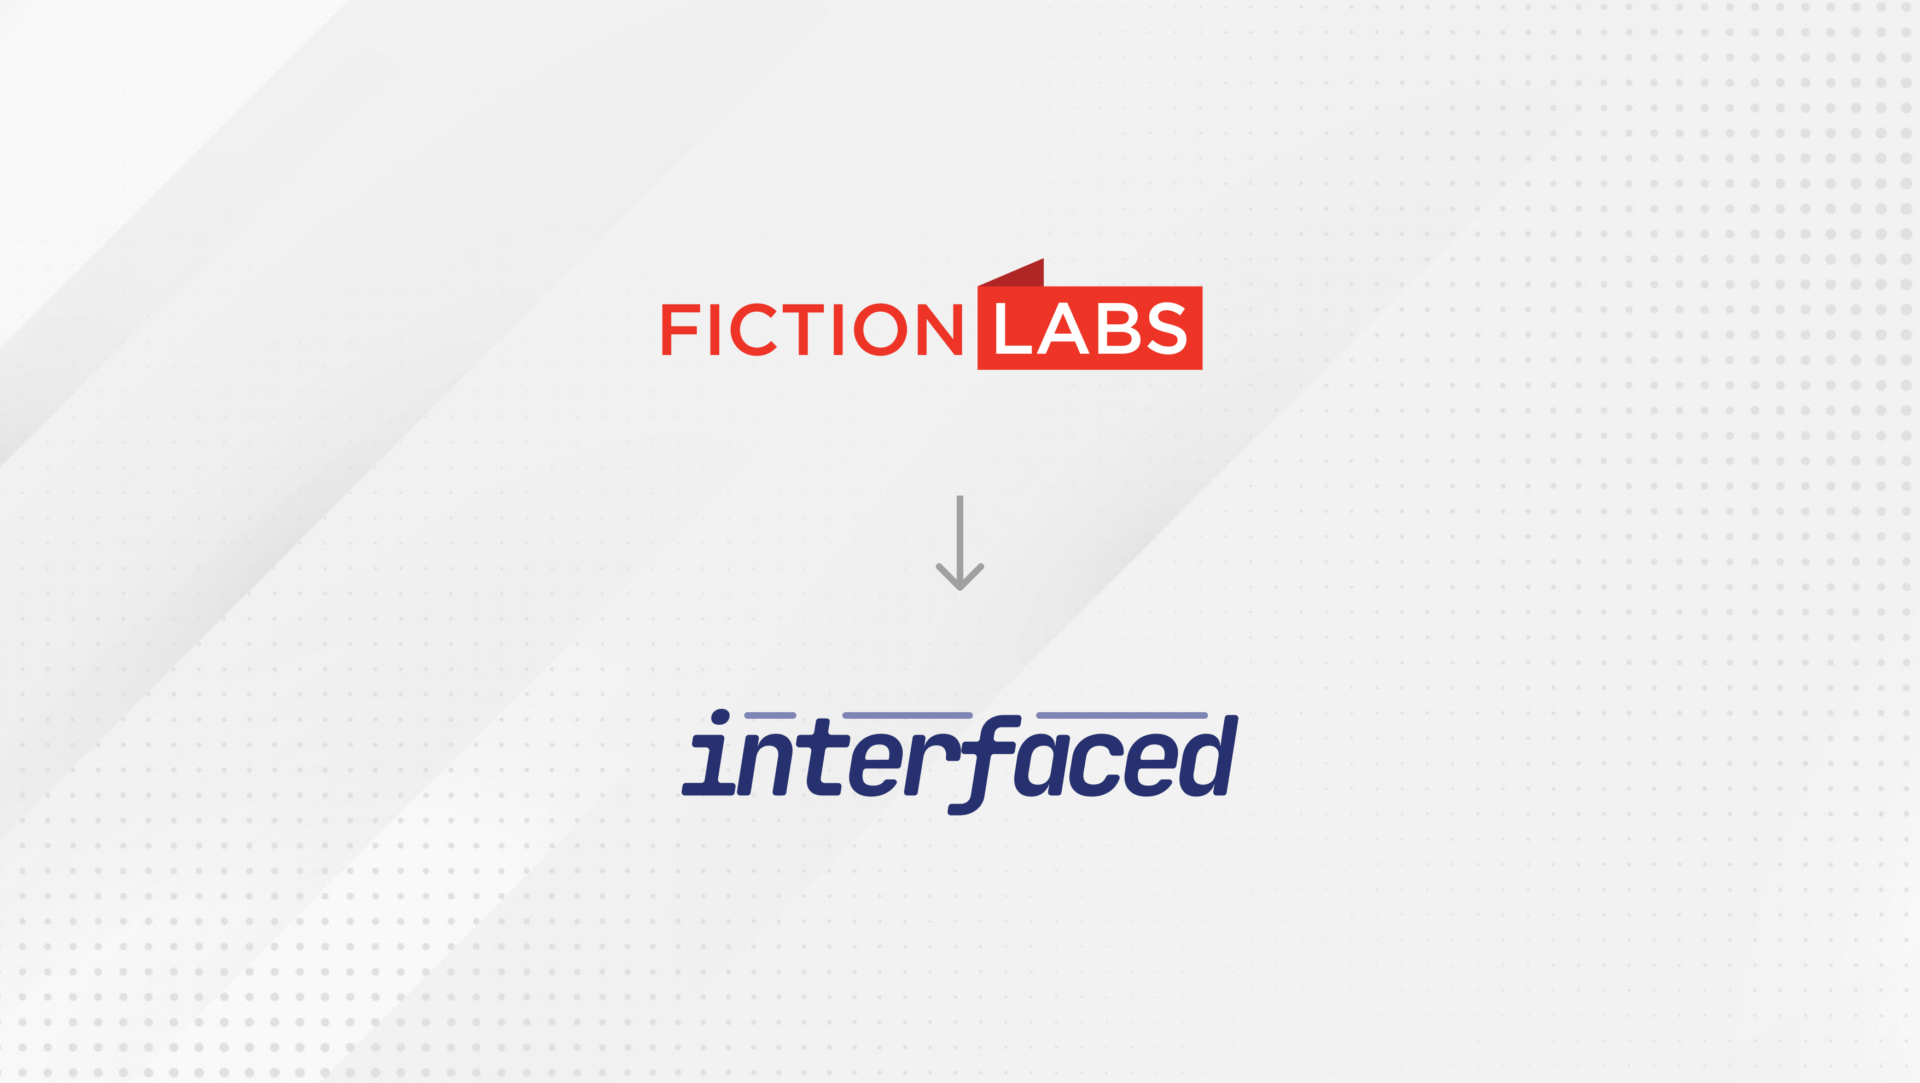 Exciting times ahead! – FictionLabs is now <i>interfaced</i>!